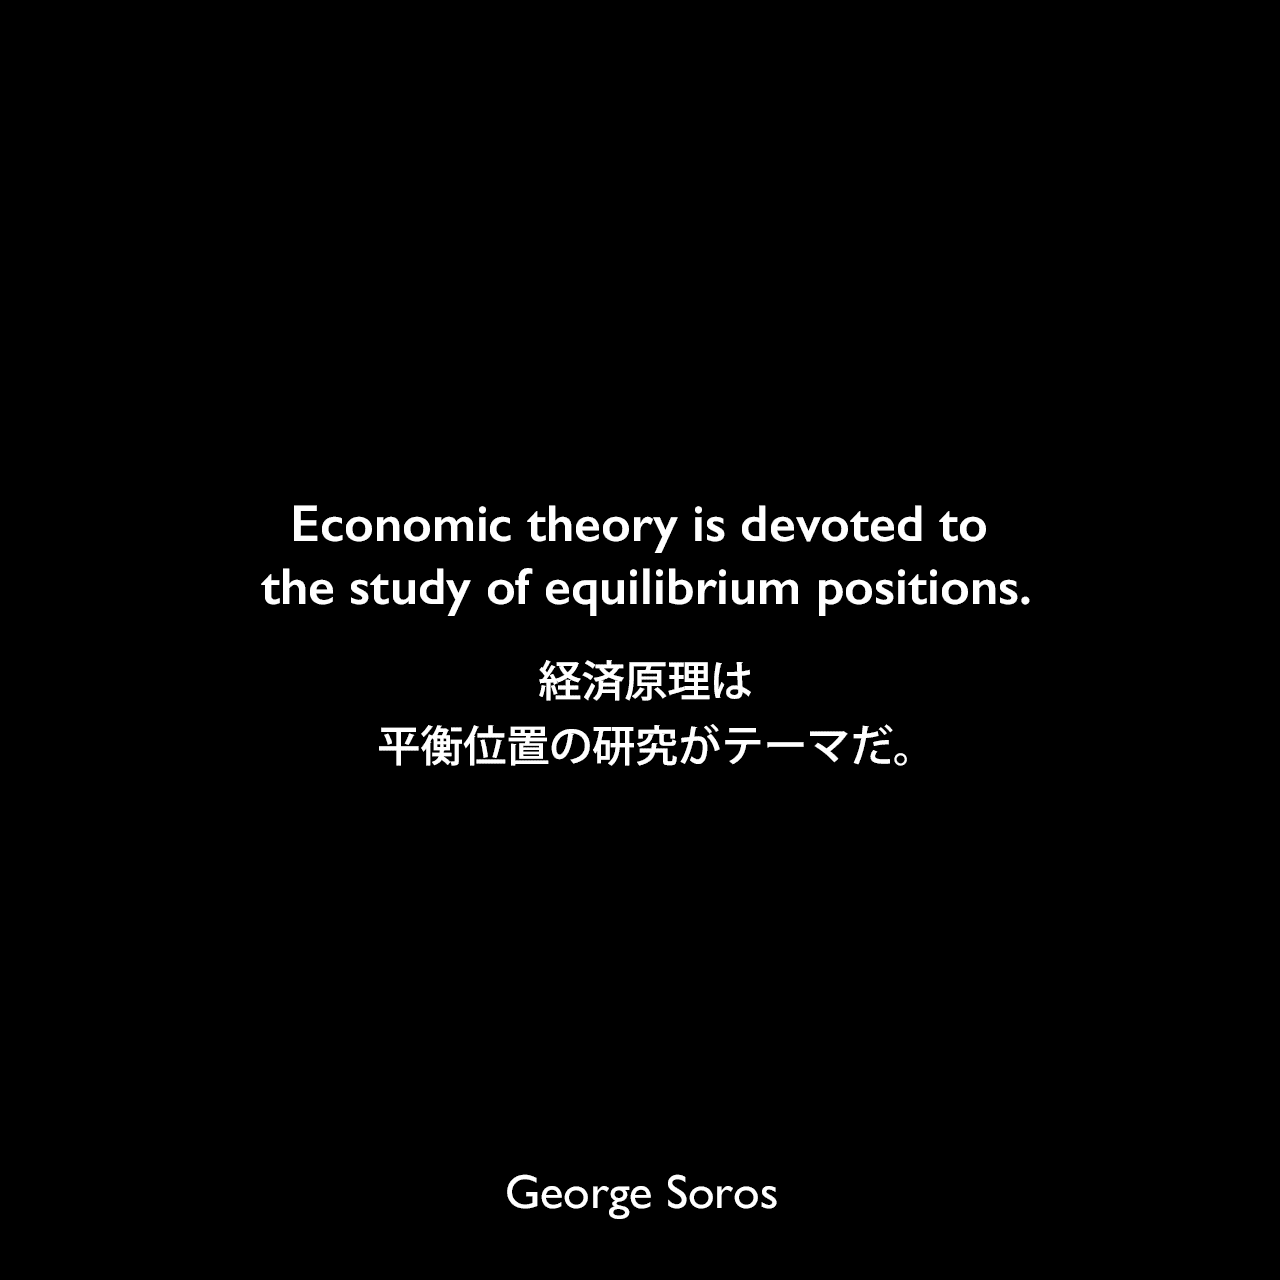 Economic theory is devoted to the study of equilibrium positions.経済原理は平衡位置の研究がテーマだ。George Soros